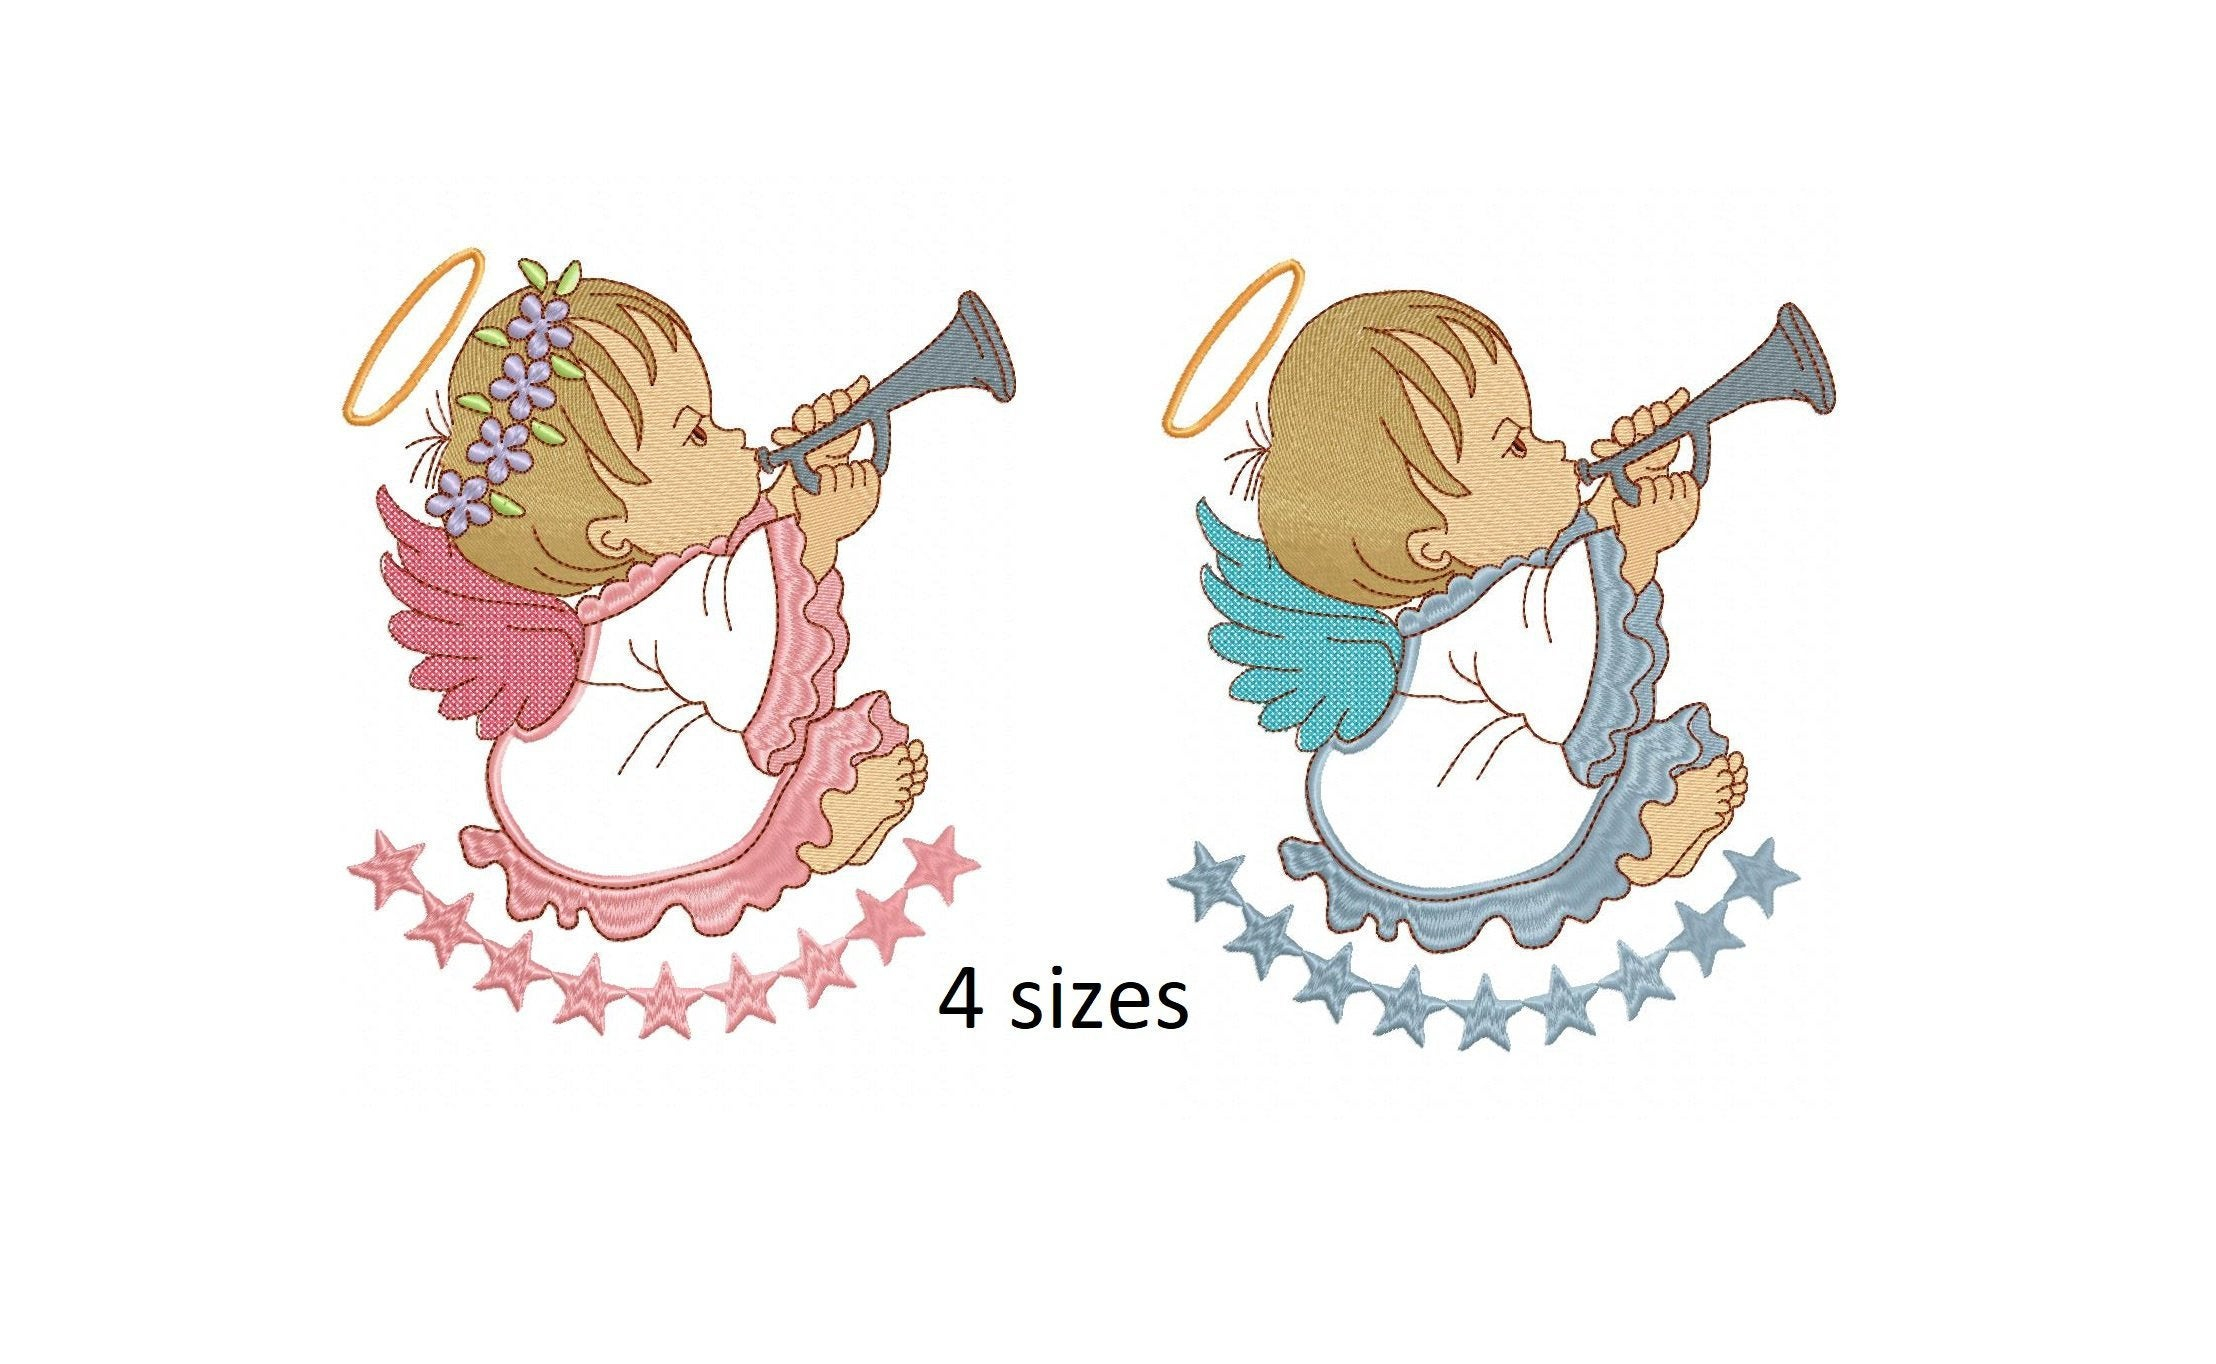 Baby Embroidery Patterns Ba Angels Girl And Boy Embroidery Designs Angel Embroidery Design Machine Embroidery Pattern Ba Embroidery Design Ba Angel Design